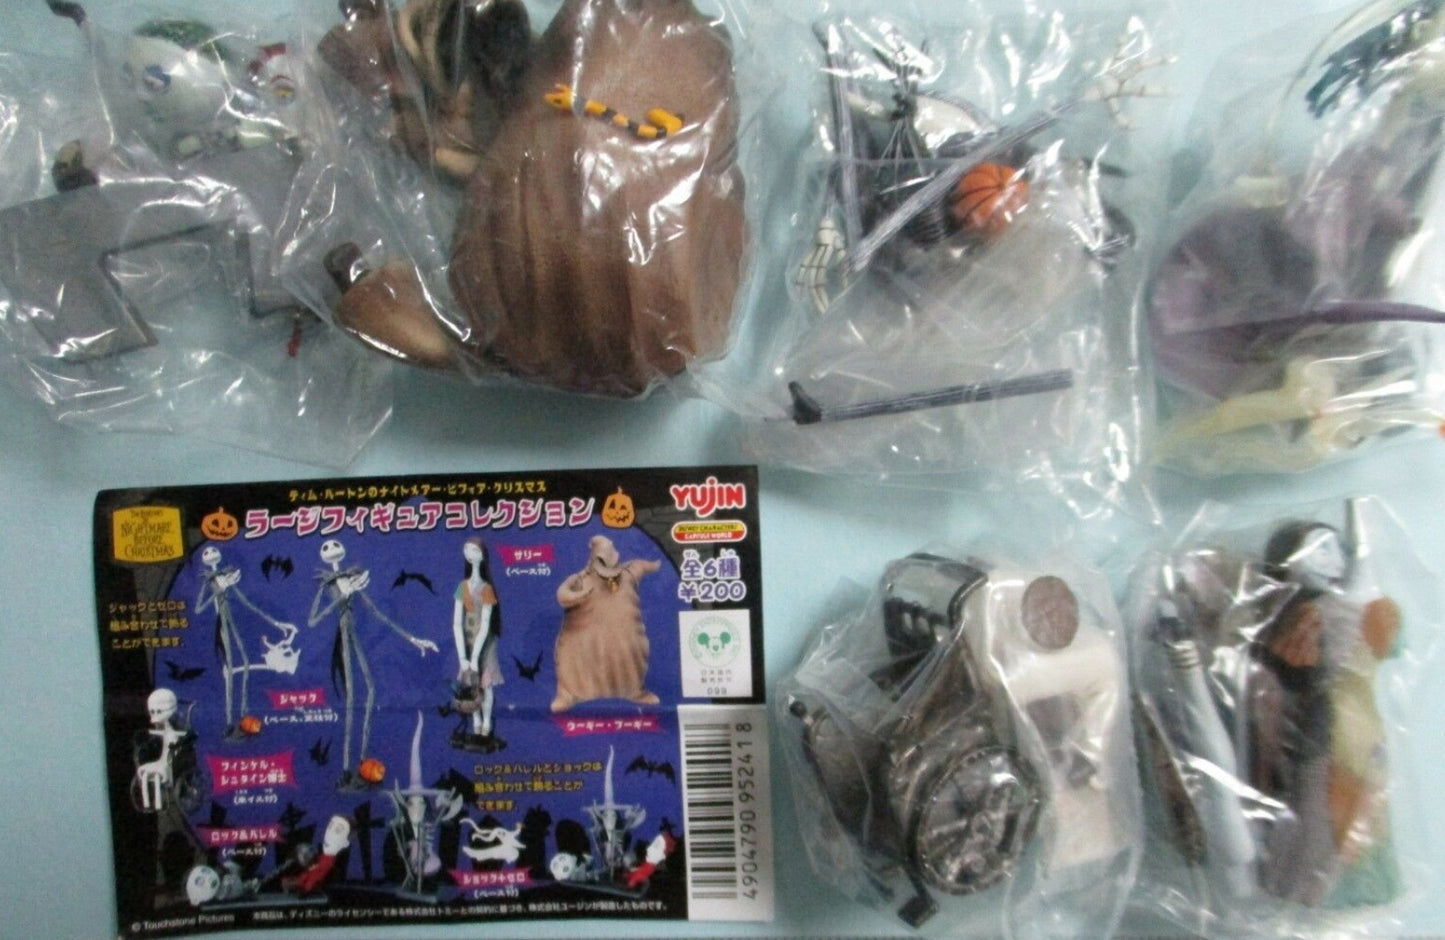 Yujin Disney Capsule World Tim Burton The Nightmare Before Christmas Gashapon Part 1 Now And Forever 5 Collection Figure Set